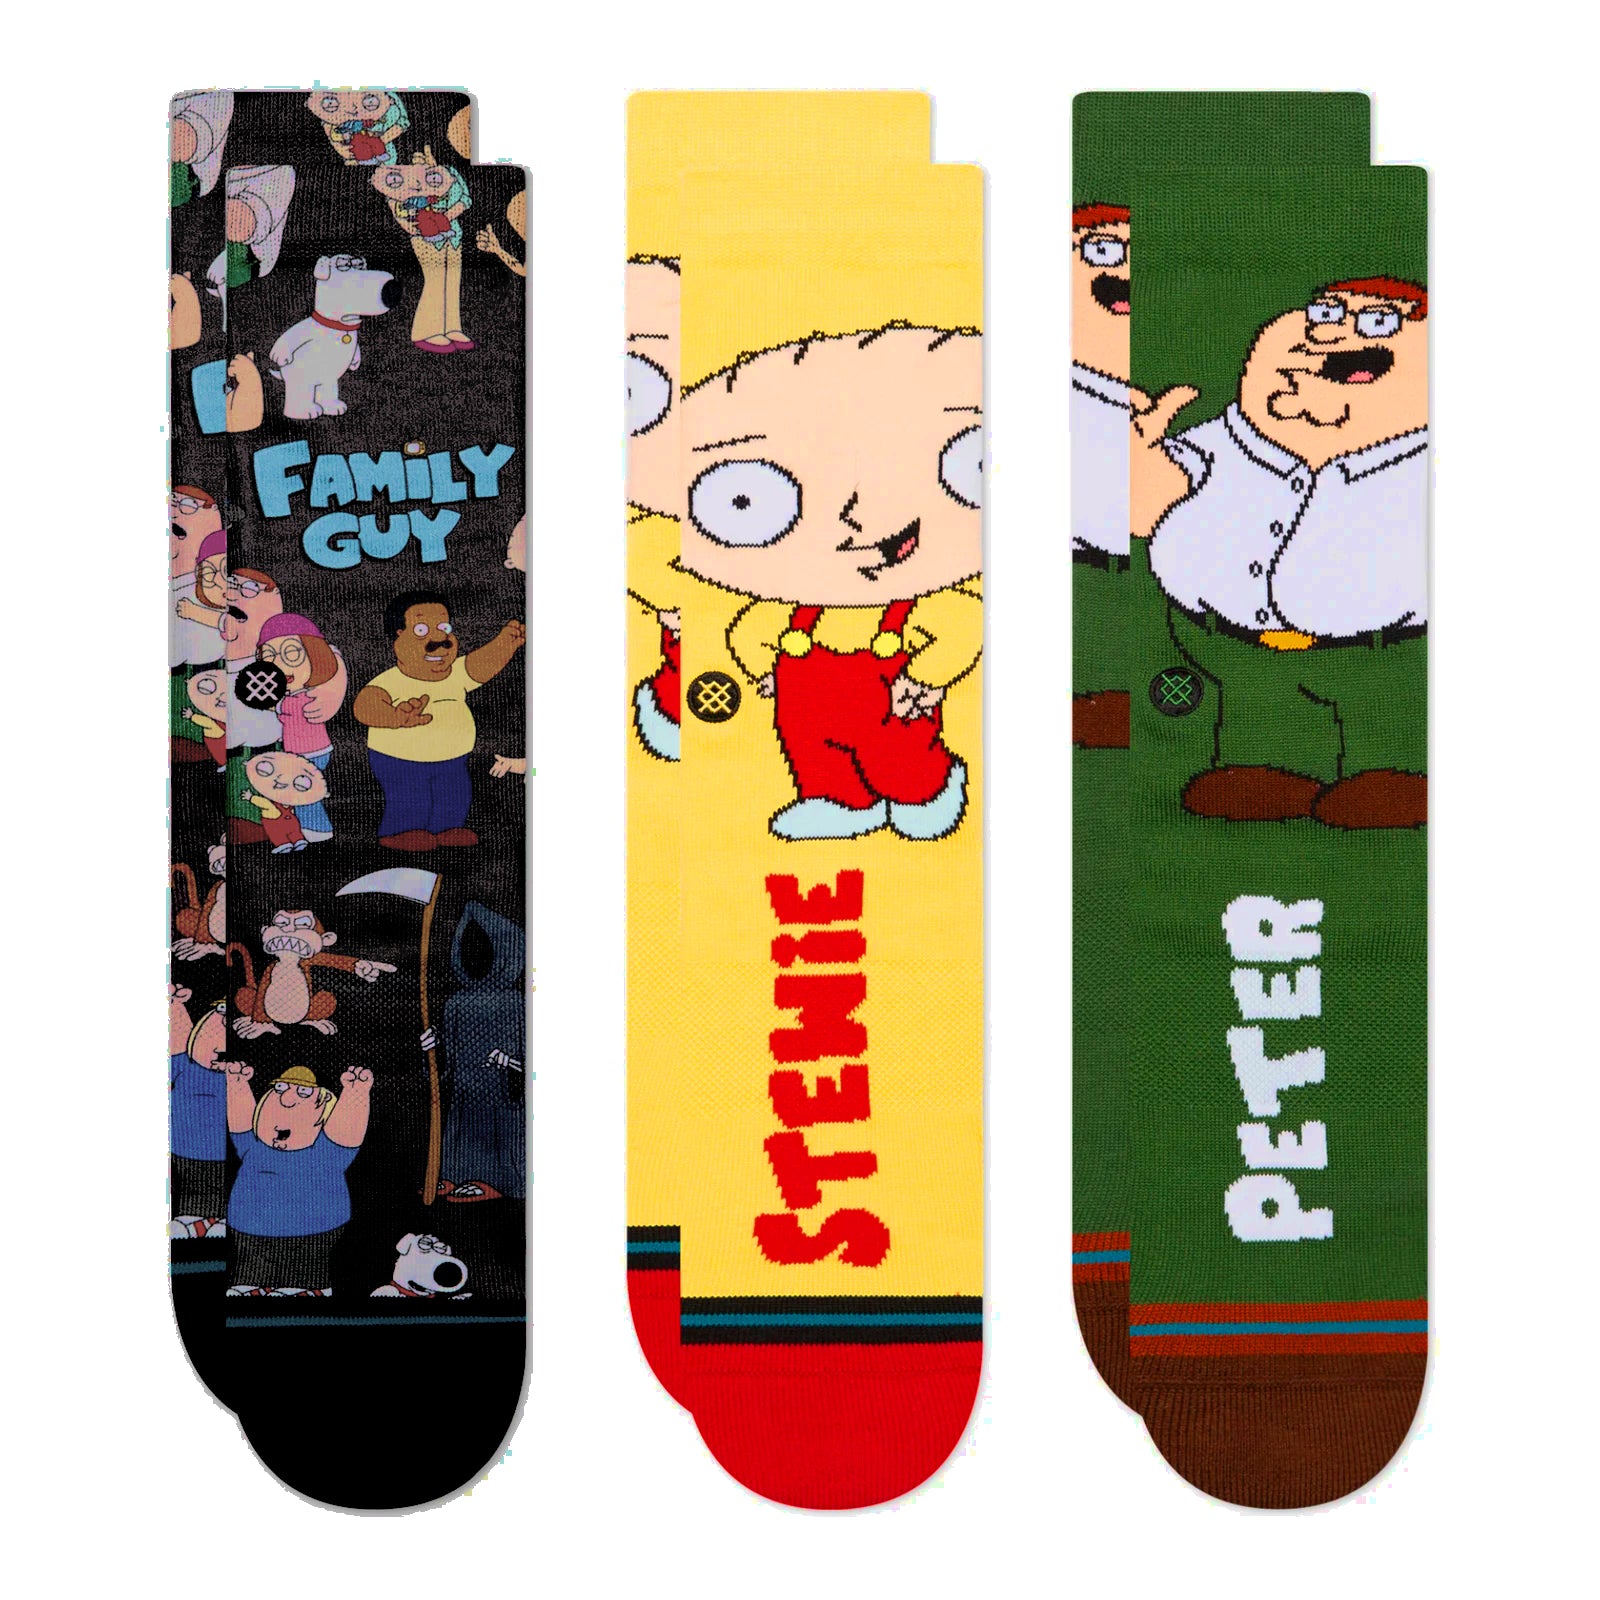 3 Stance Socks with the Family Guy characters from the Popular TV Series.